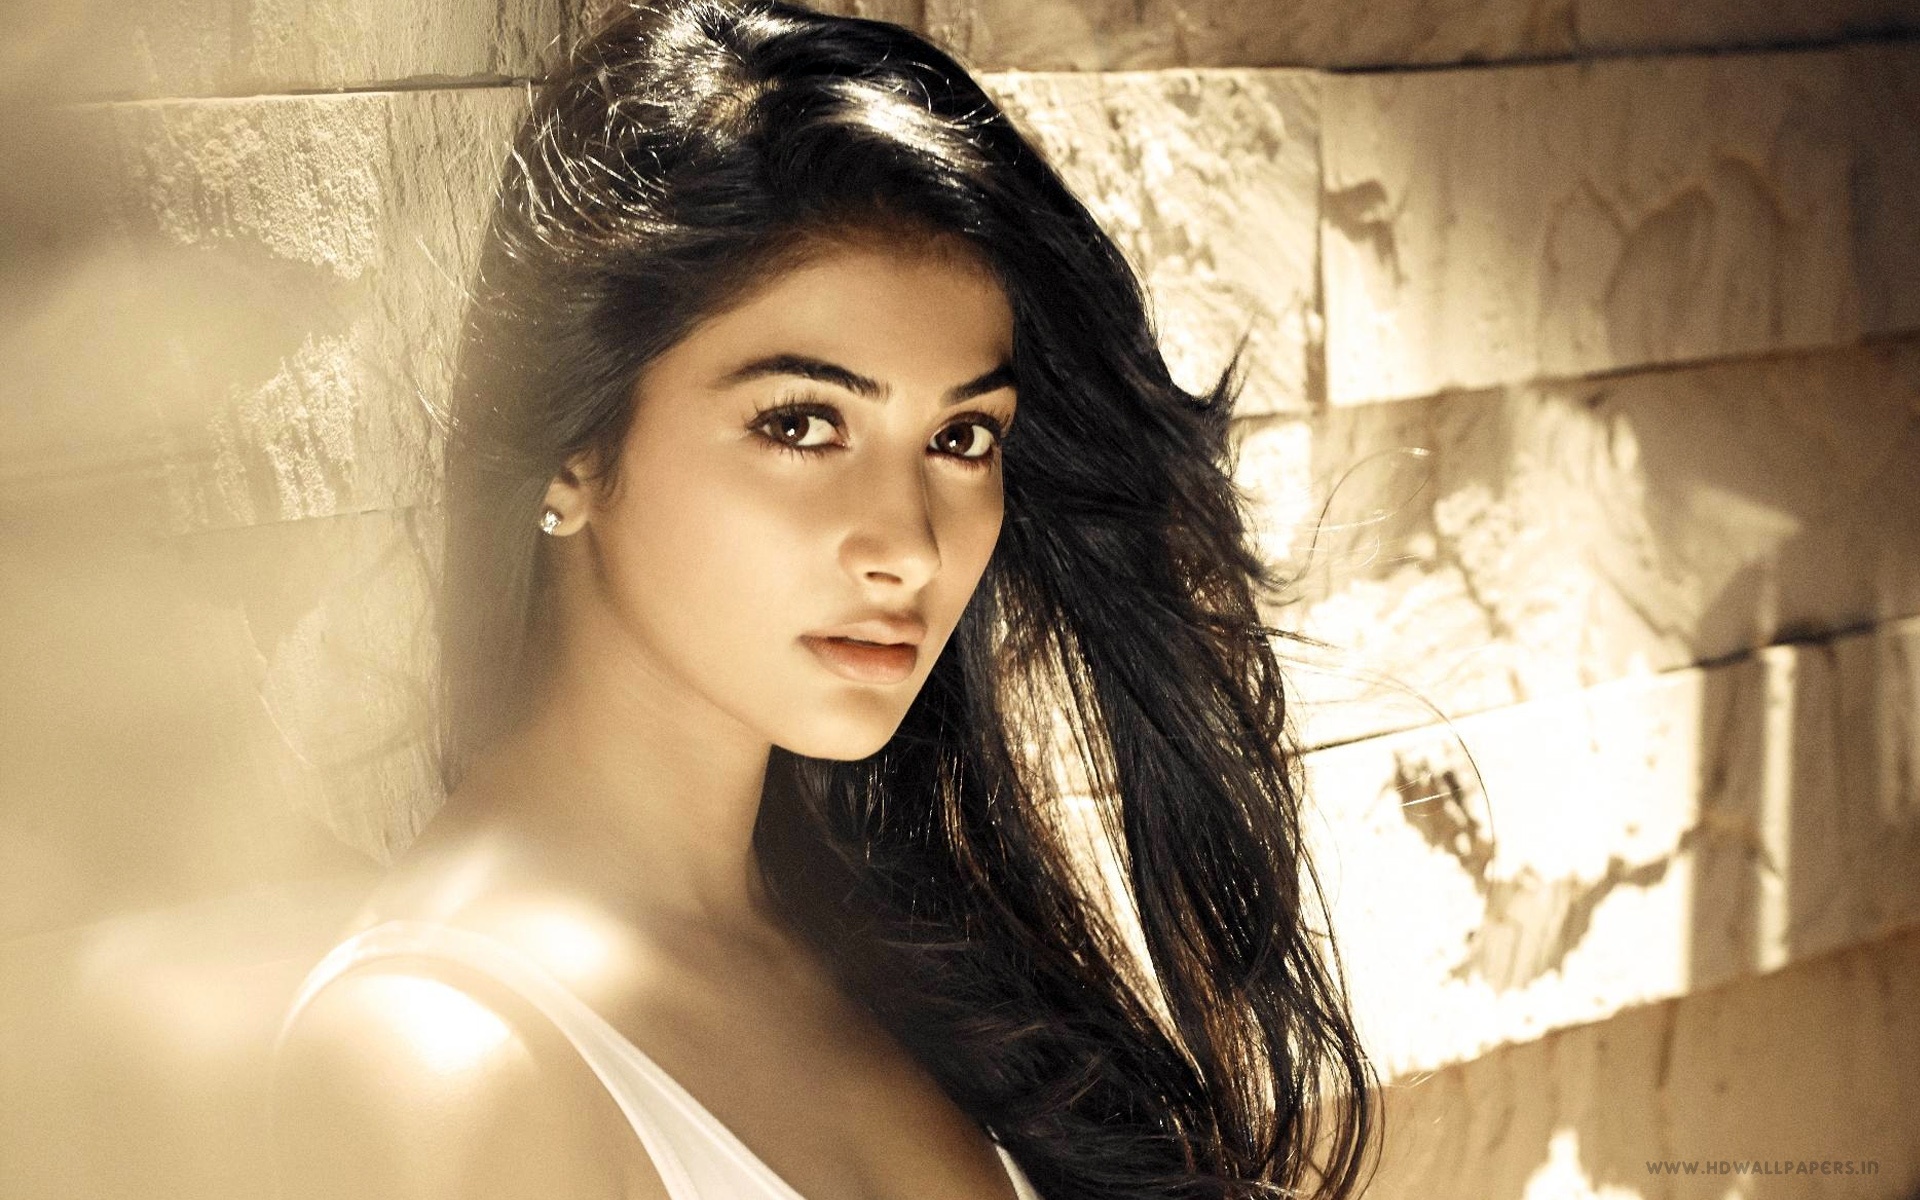 Actress Pooja Hegde Wallpapers In Jpg Format For Free , HD Wallpaper & Backgrounds